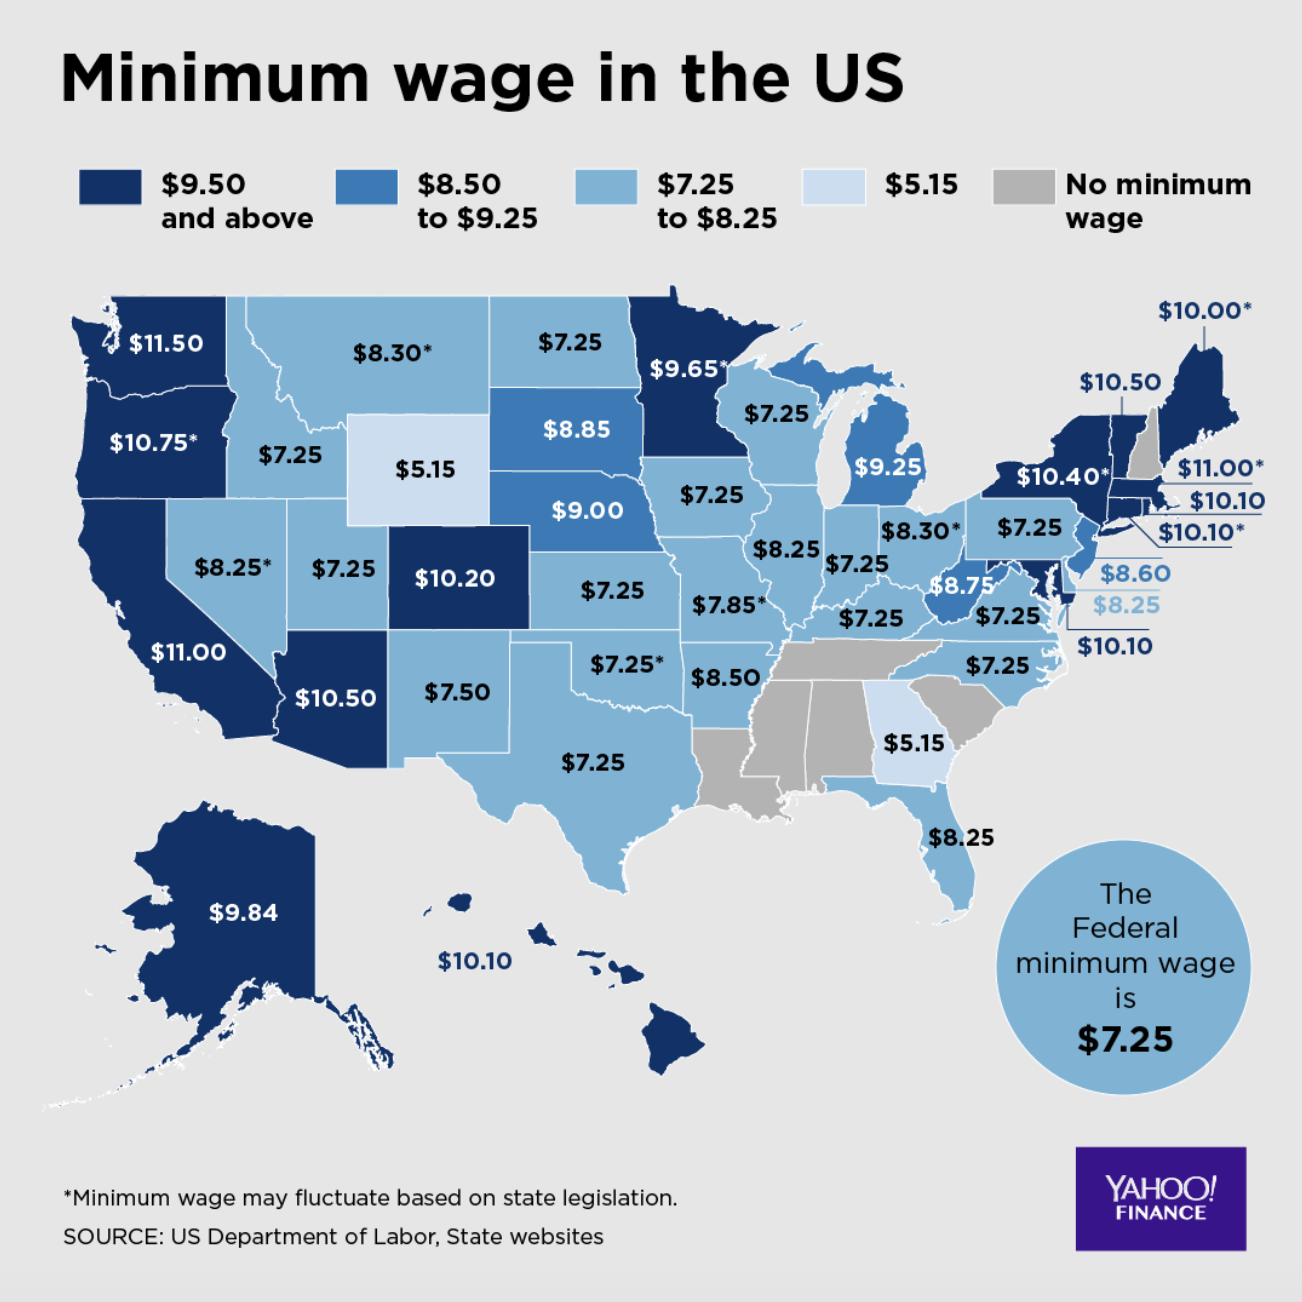 CBO 15 minimum wage would boost pay for 17 million workers [Video]